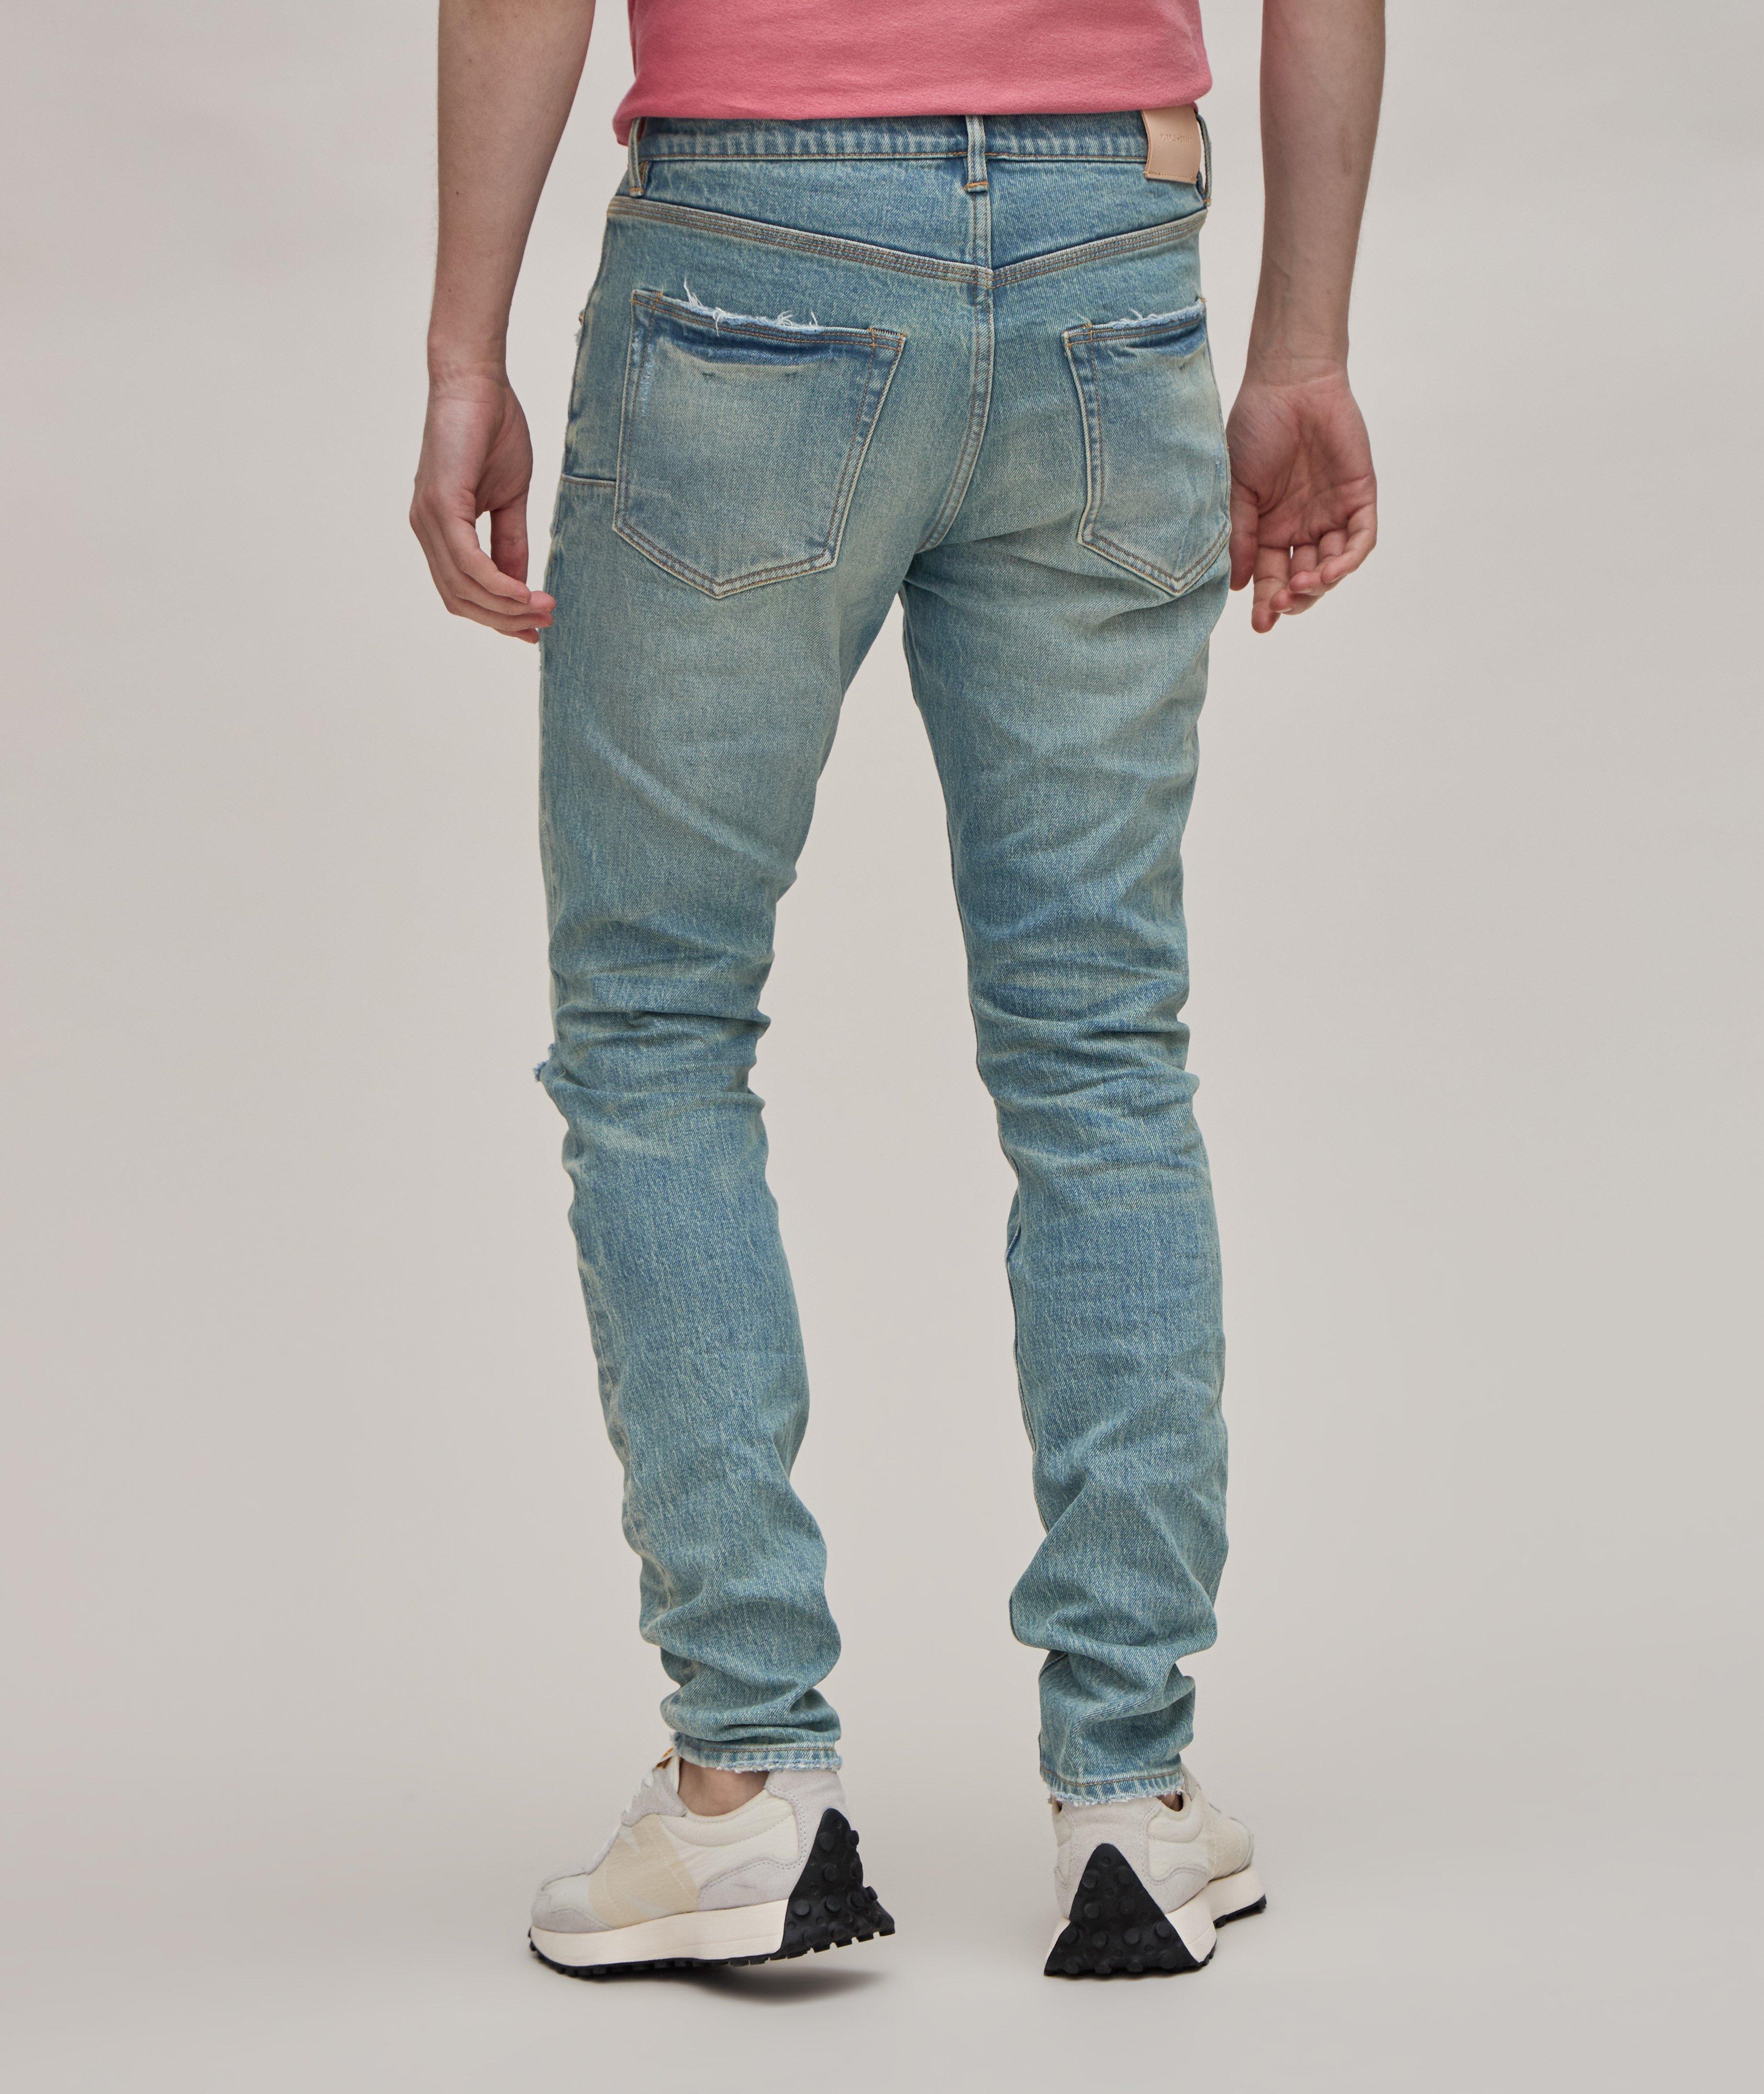 P001 Aged Ripped & Distressed Jeans  image 2